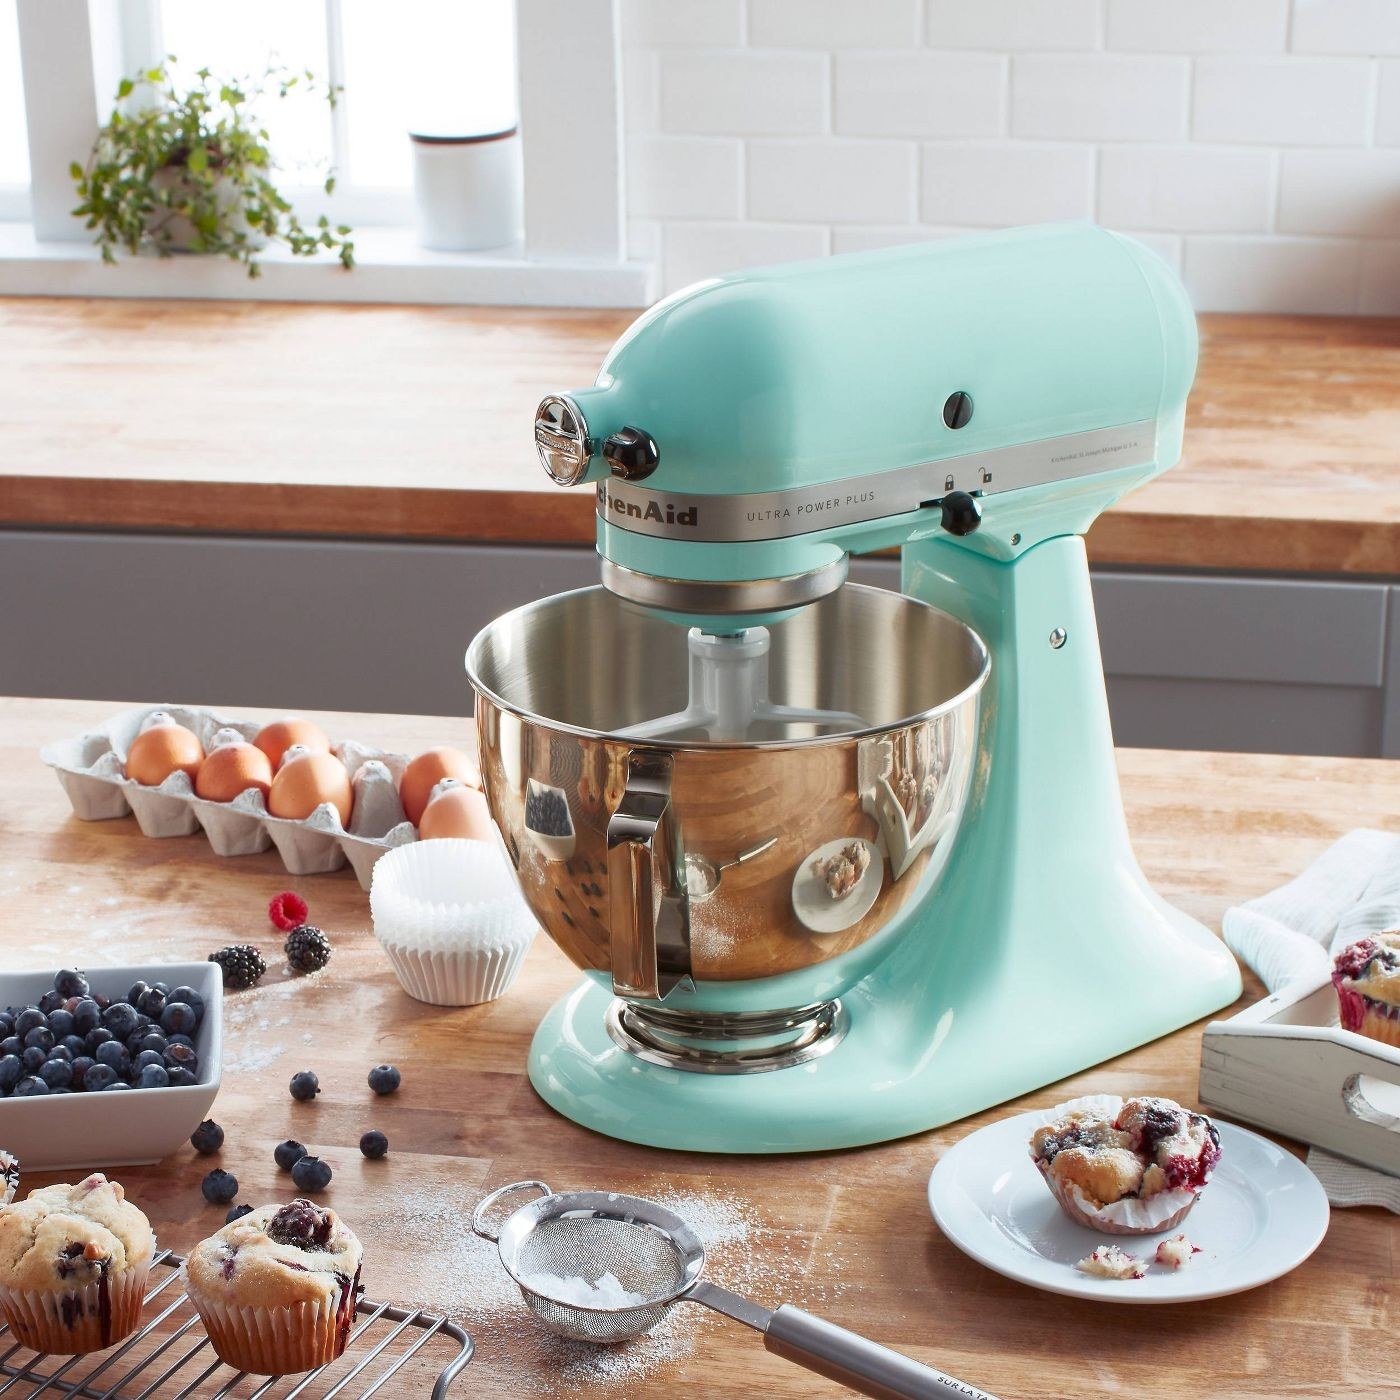 An ice blue KitchenAid mixer sits on a counter